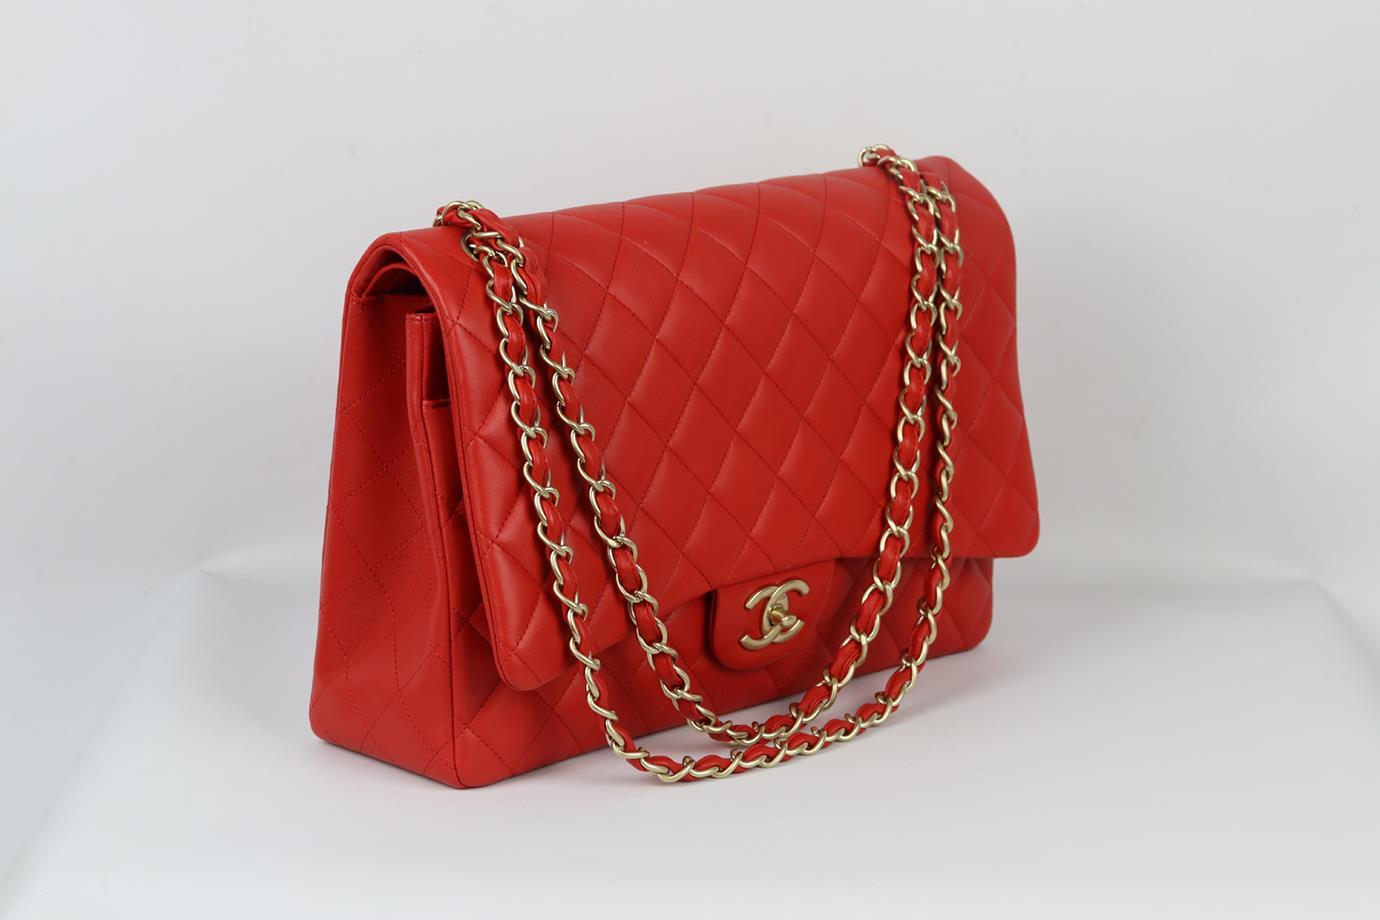 Chanel 2012 Maxi Classic Quilted Leather Double Flap Shoulder Bag For Sale 1